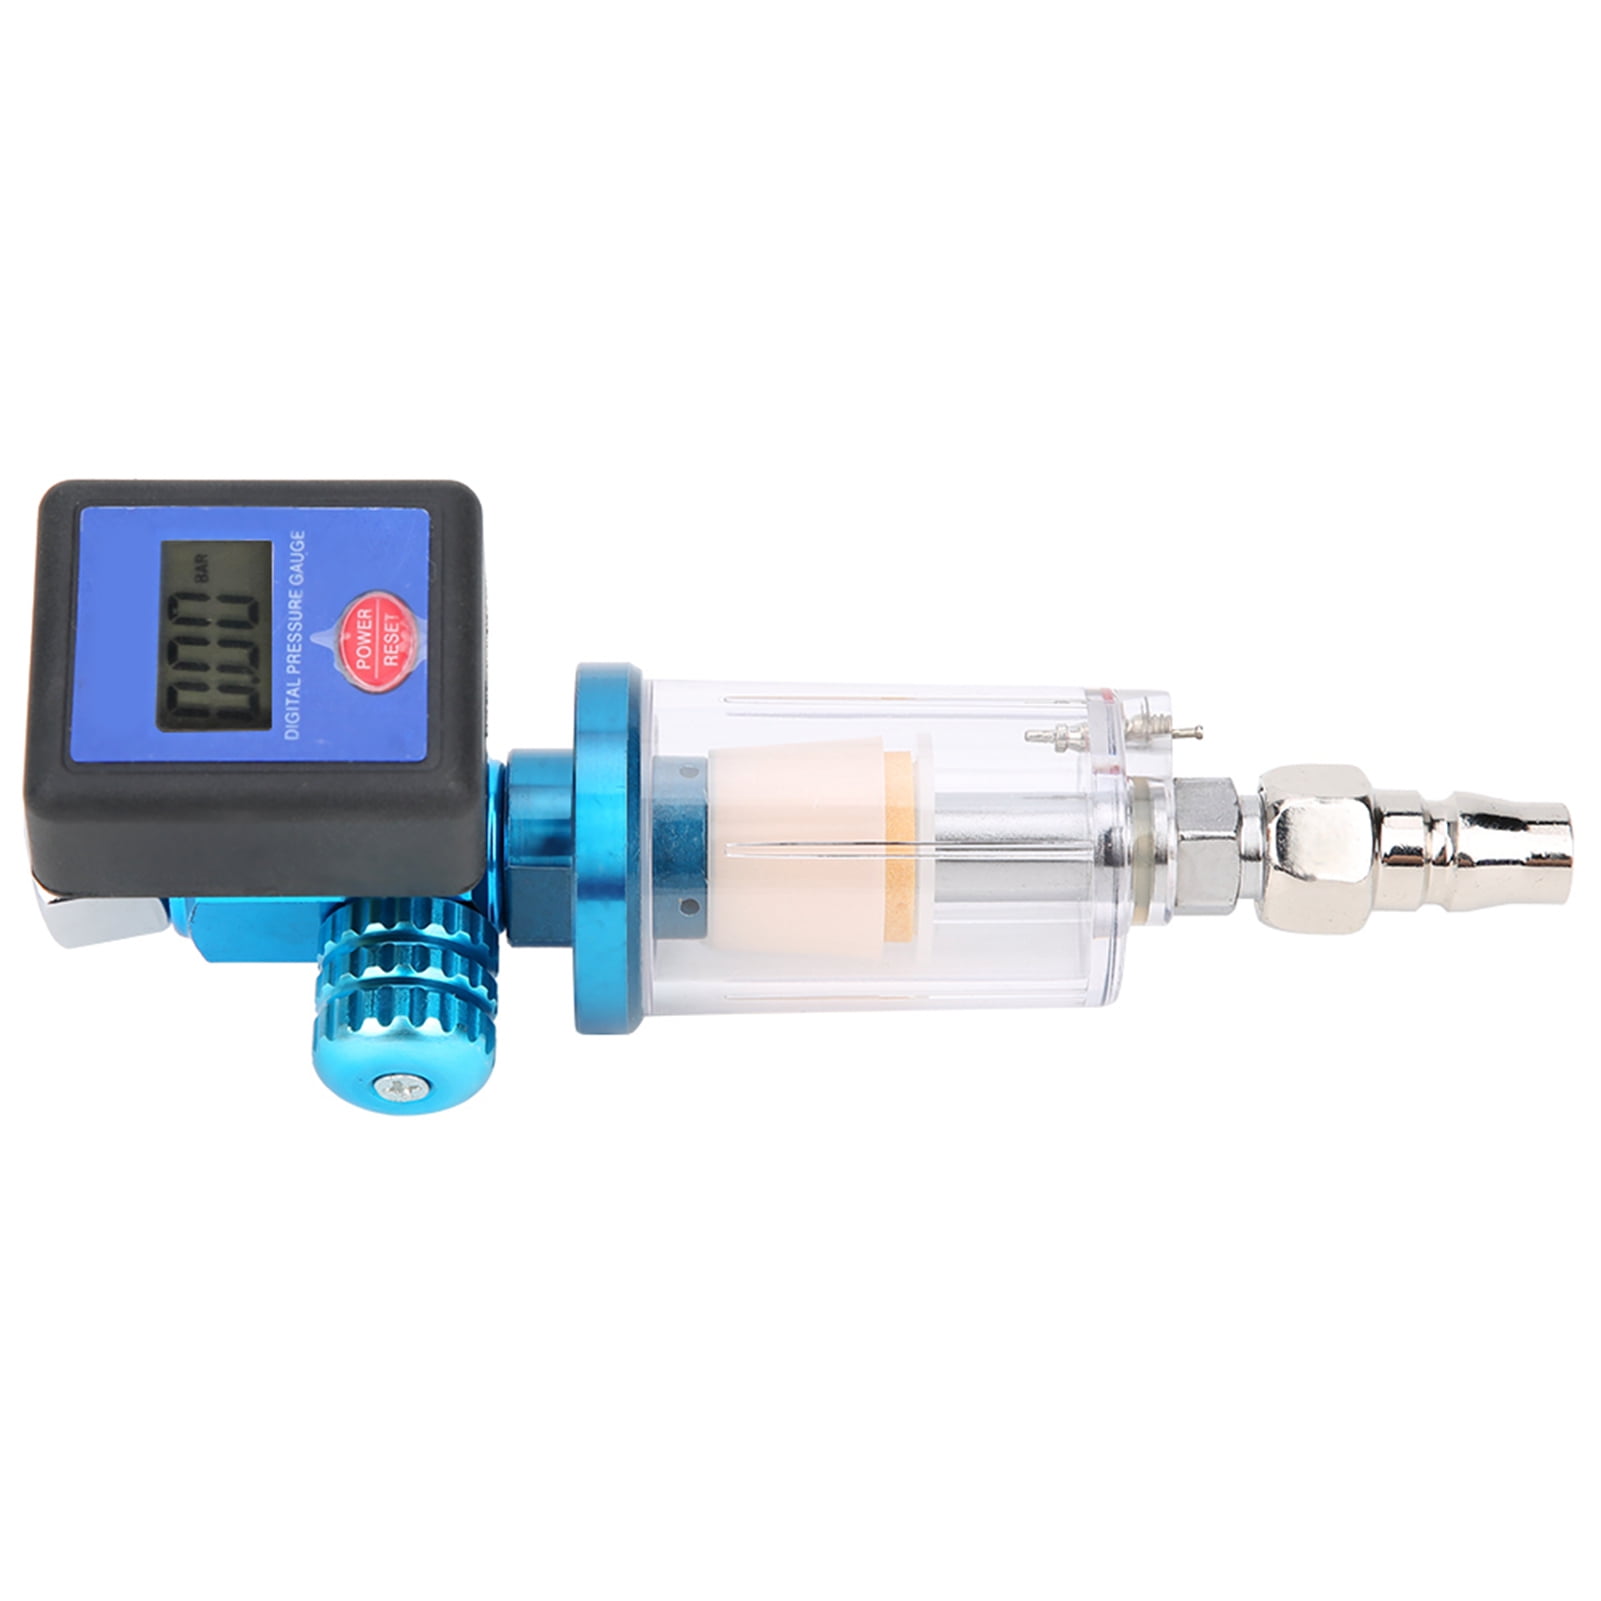 Oil‑Water Separator Durable Digital Air Pressure Meter MF08 MF01 Quick Response with Connector 1/4in Thread for Adjust Air Pressure 